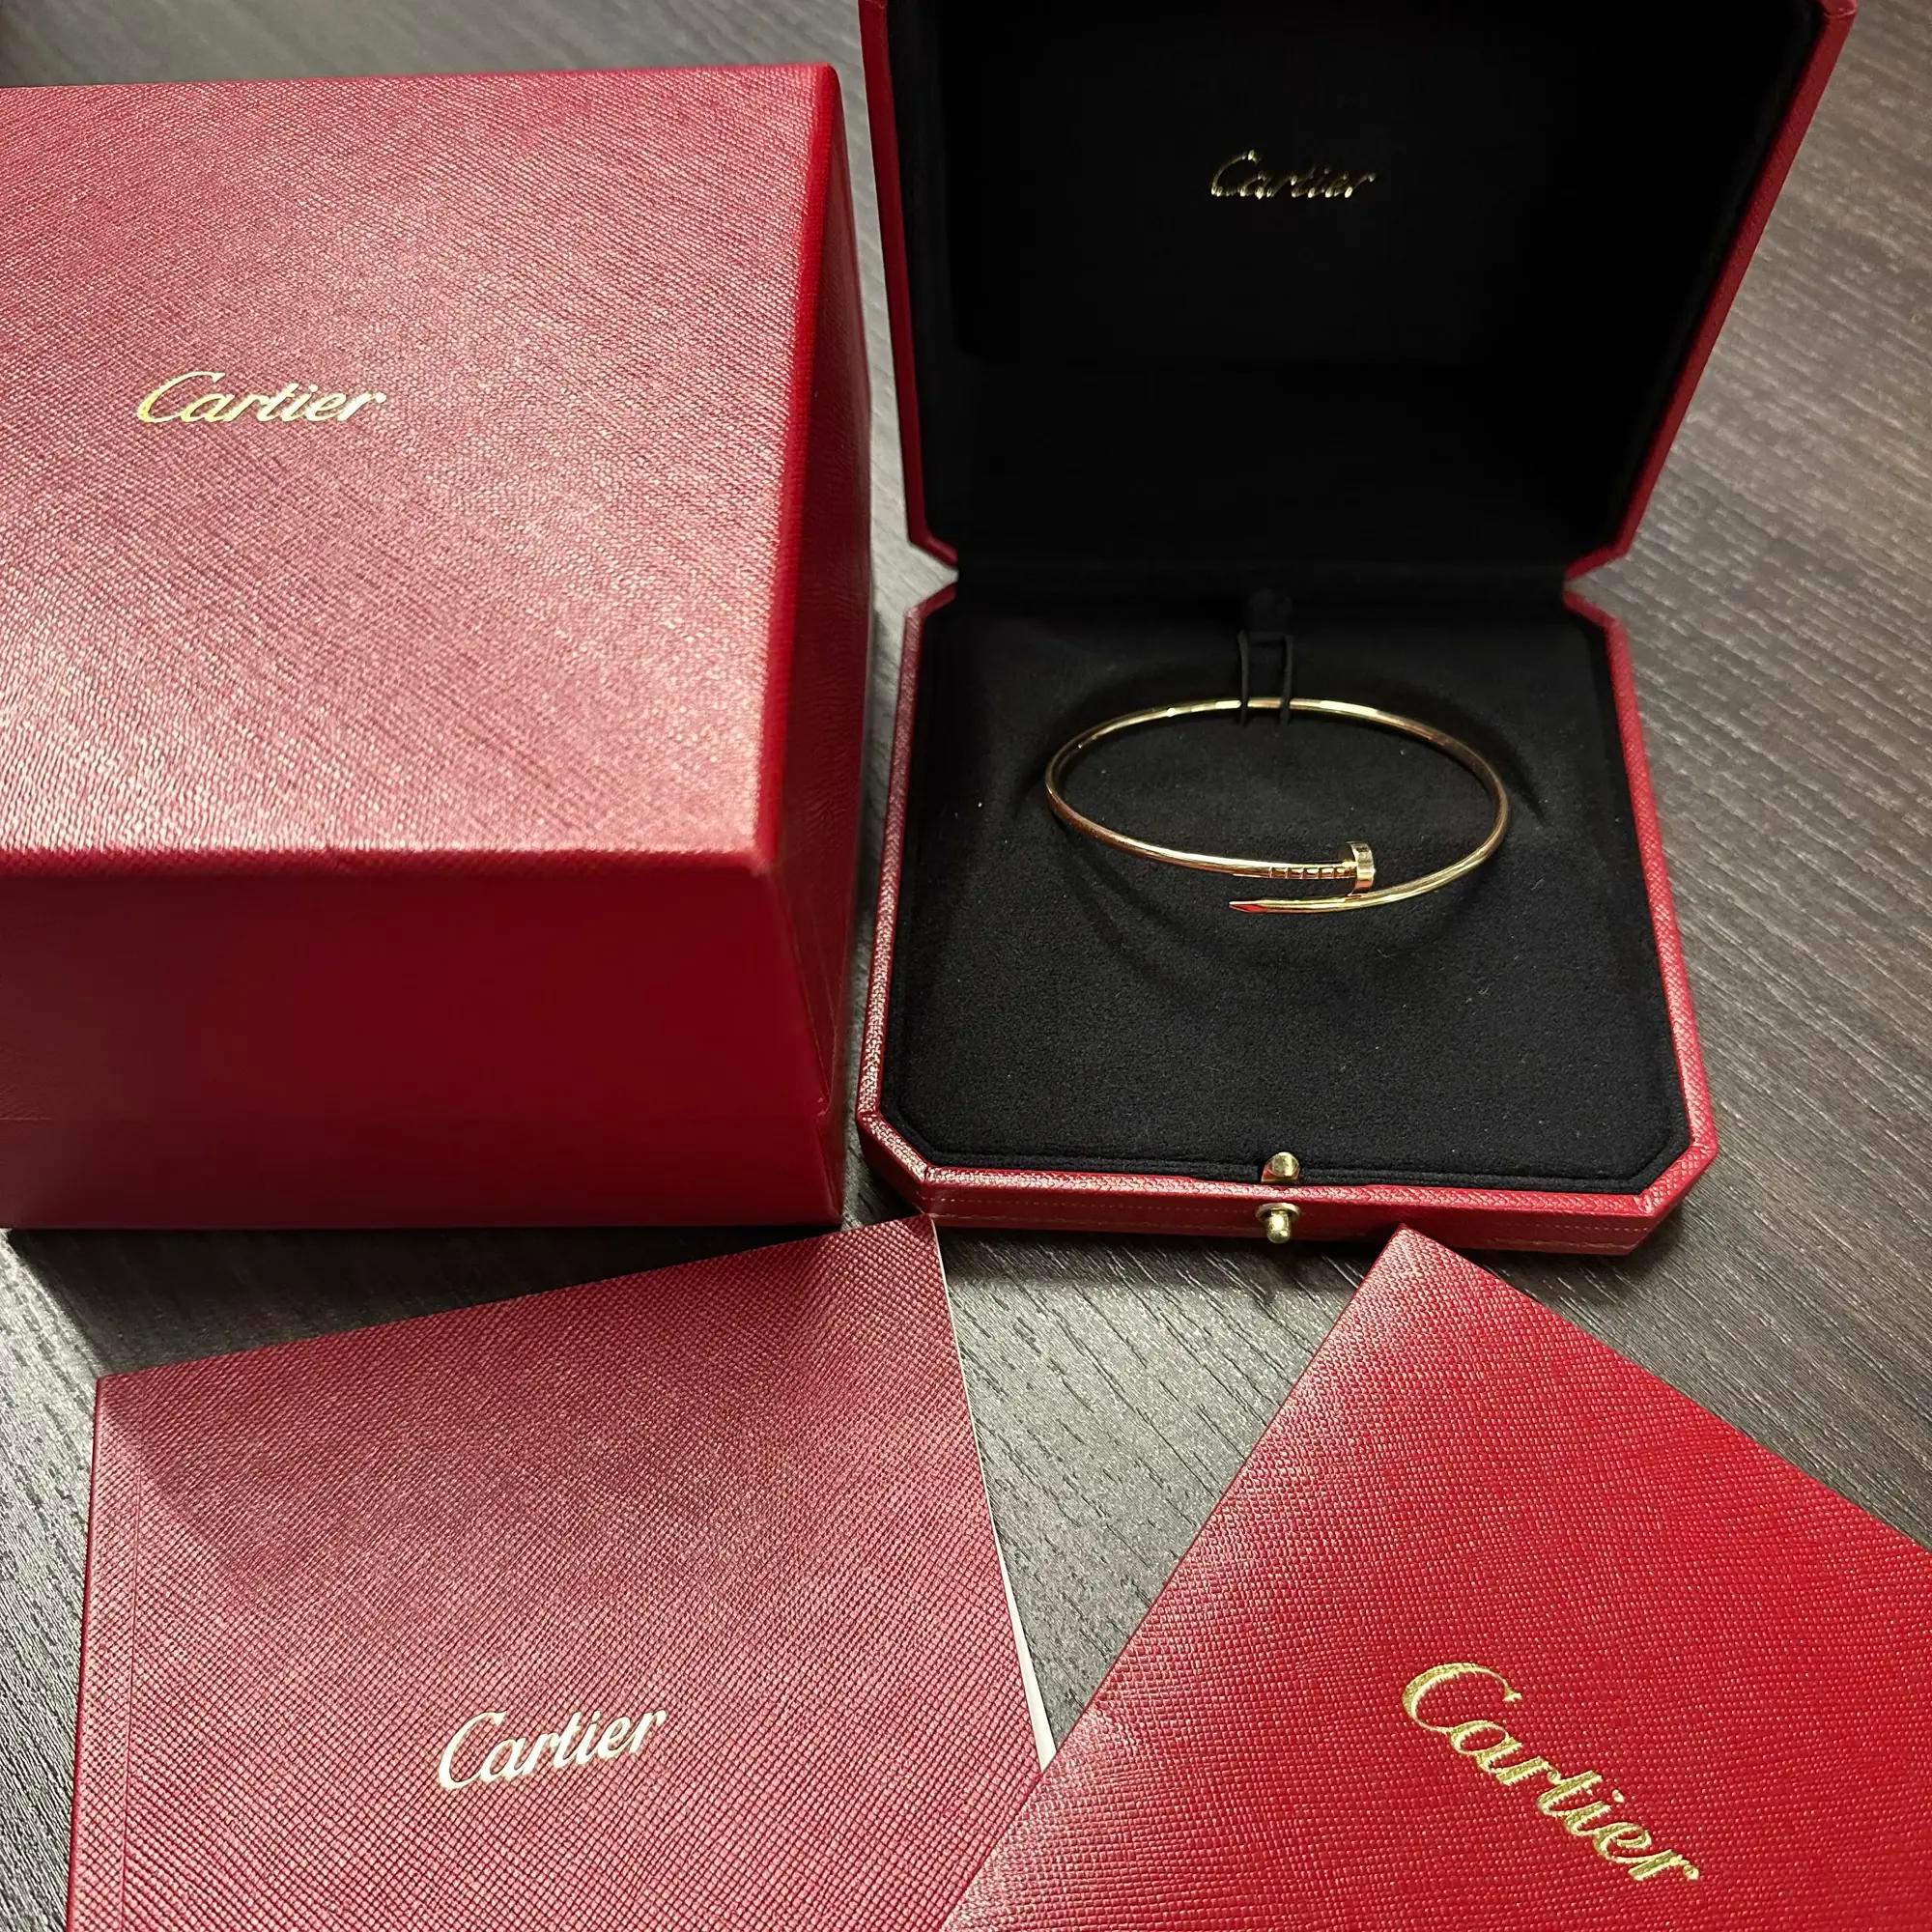 Cartier Juste un Clou bracelet. Small model. Crafted in 18K rose gold. Width: 2.5mm. Size 19. Total weight: 10.55 grams. Excellent preowned condition. No paper. Comes with the original box. 
